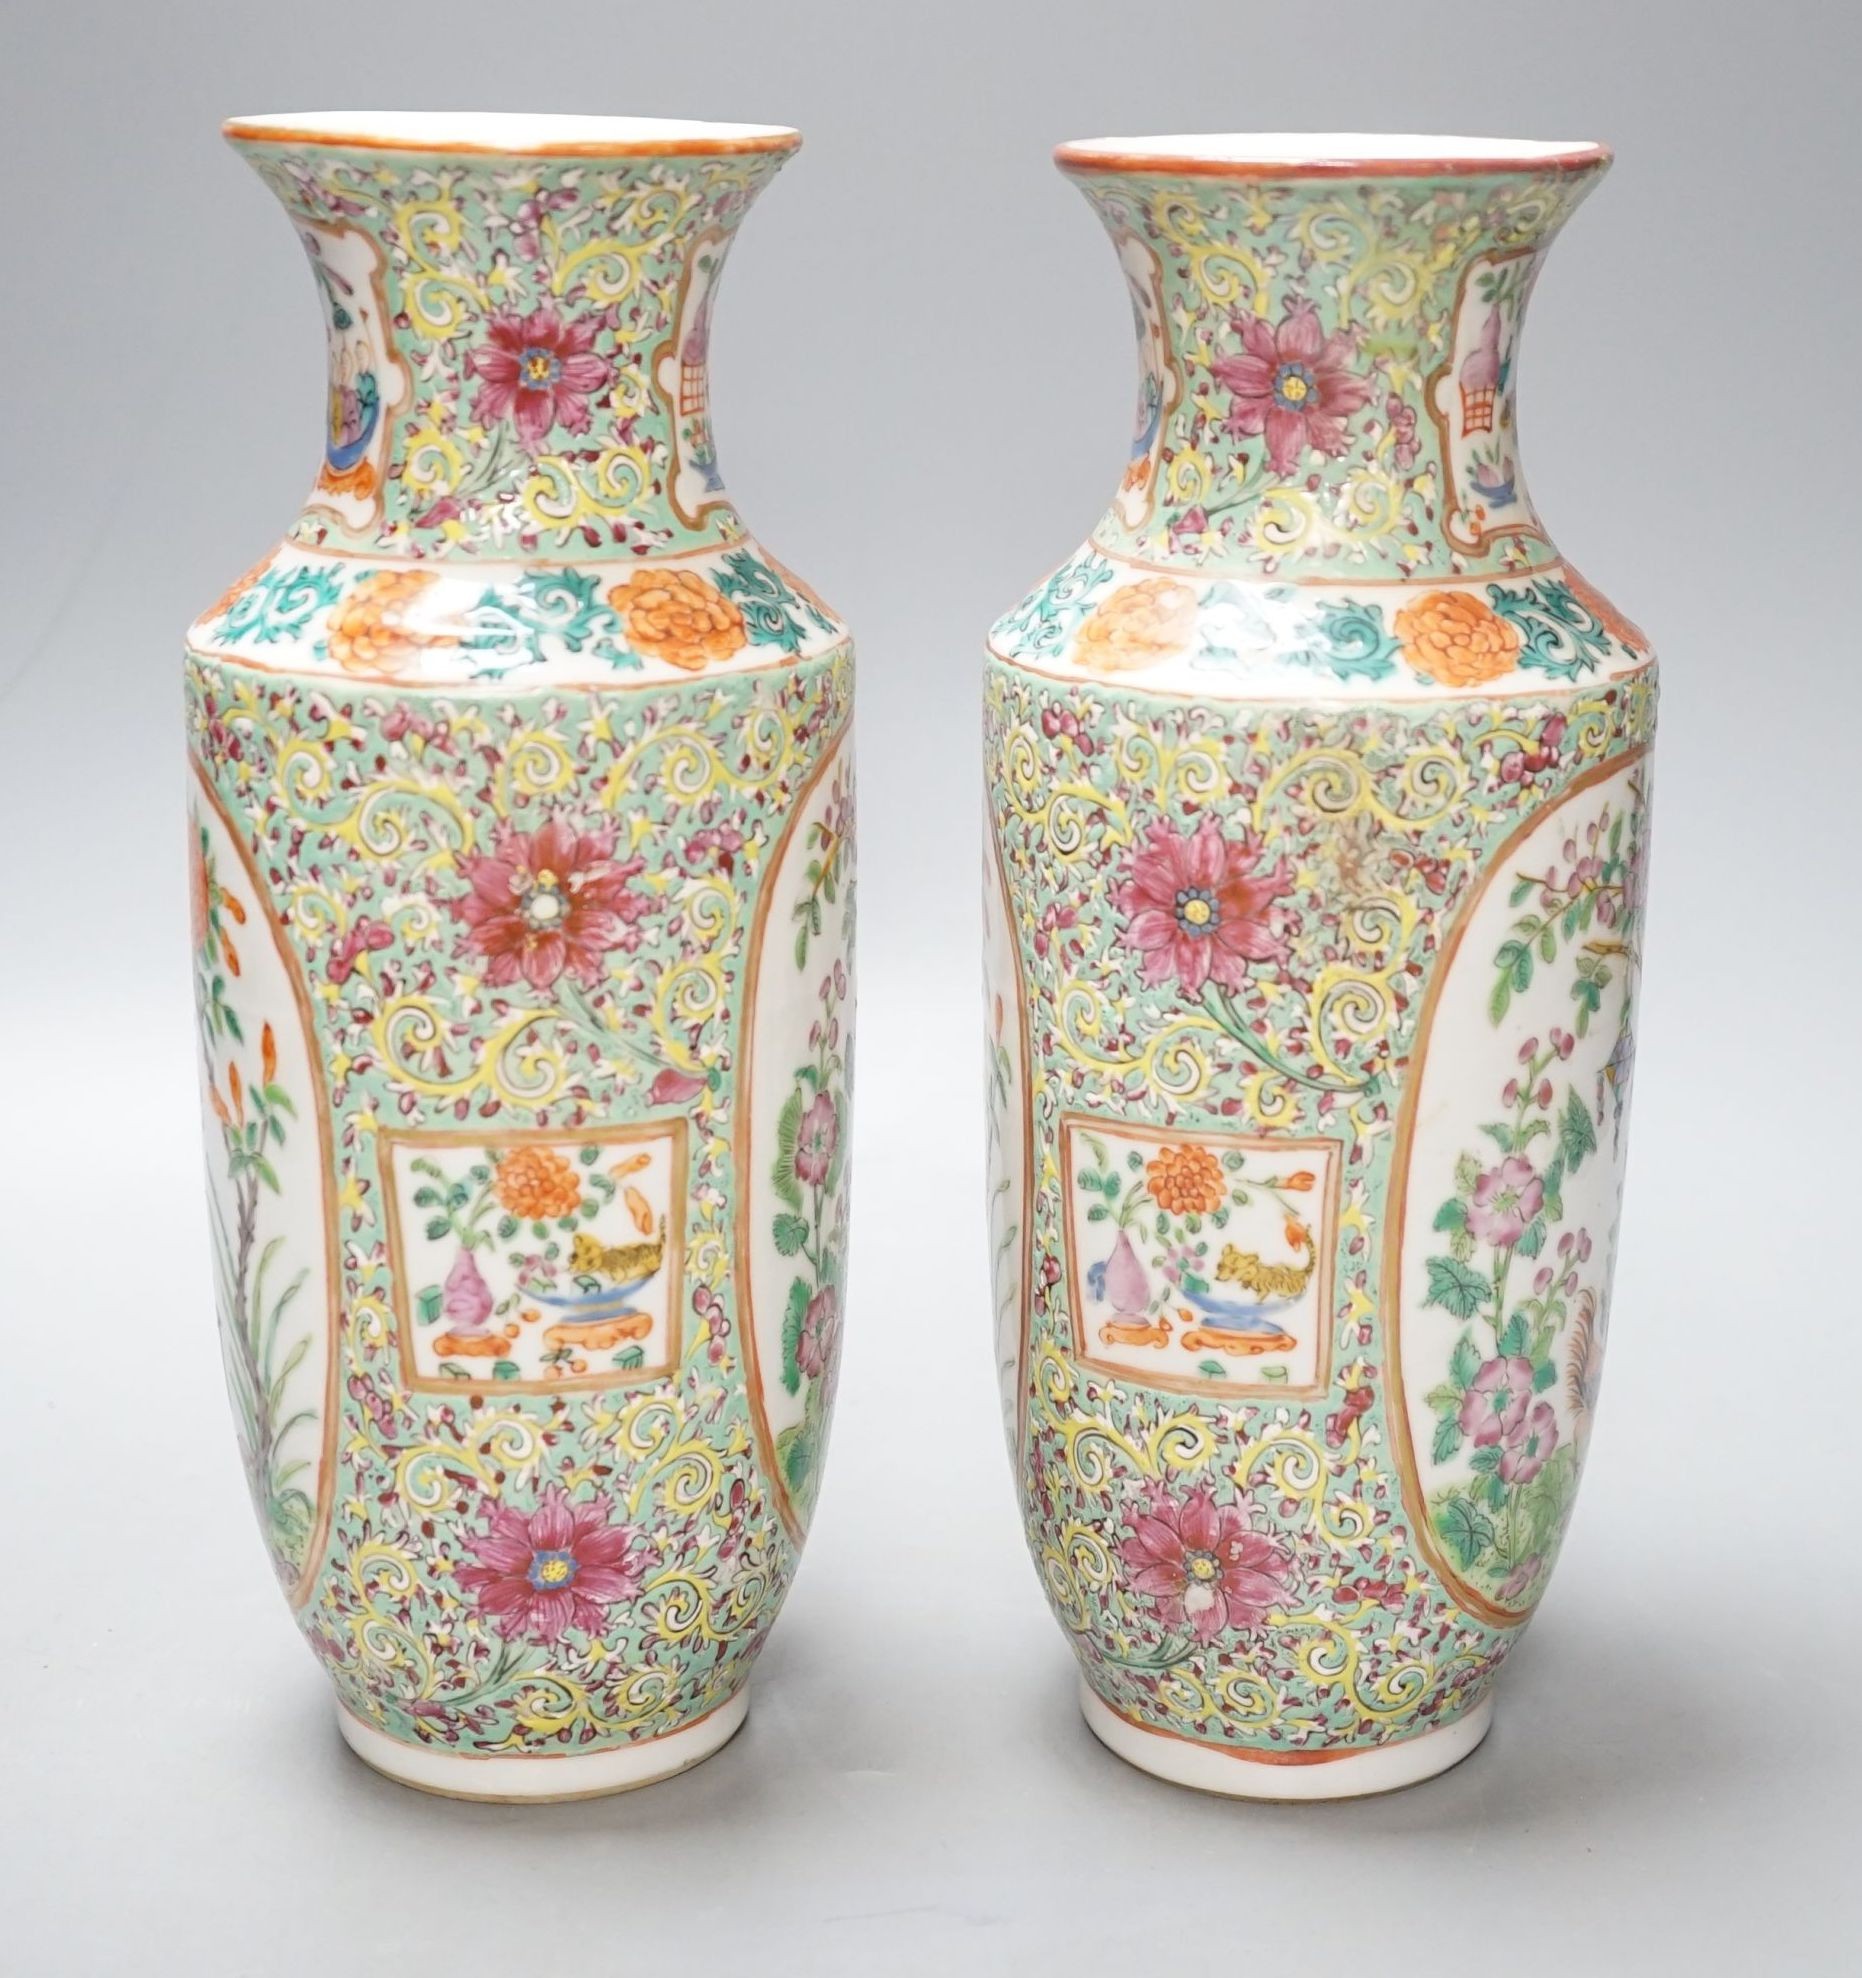 A pair of 19th century Chinese Canton decorated famille rose vases - 25cm tall